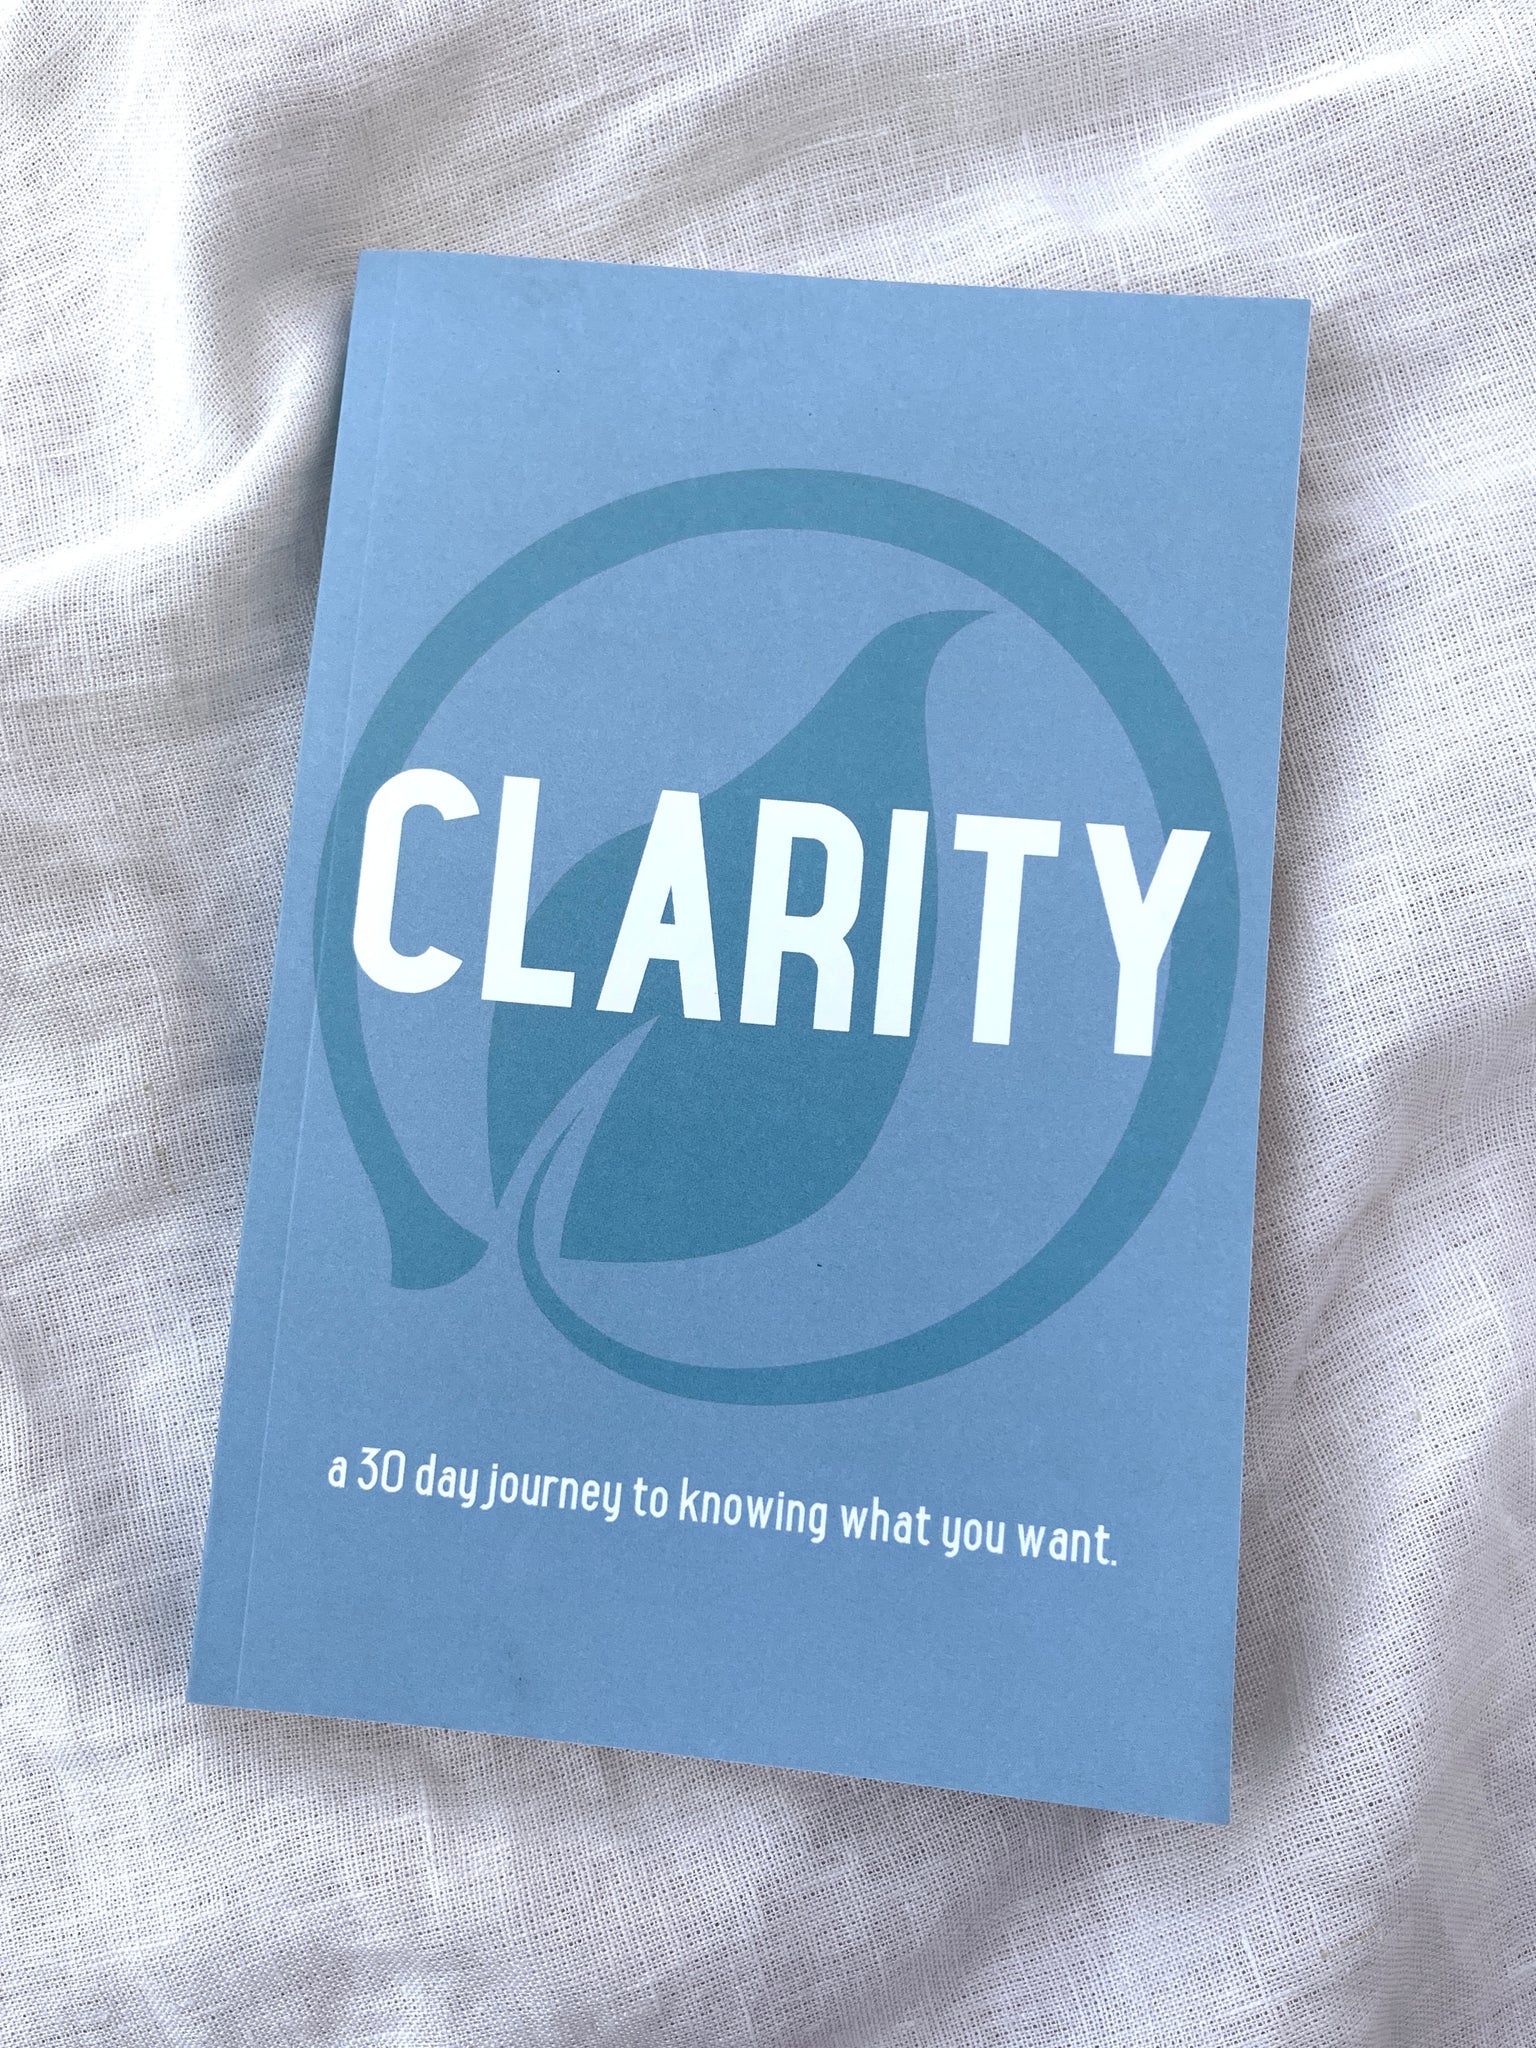 Clarity 30 Day Guided Journal We created this 30-day guided journal to help you get clear on what it is you really want. Use these prompts every day to open your mind and create the clarity you're looking for in your life.